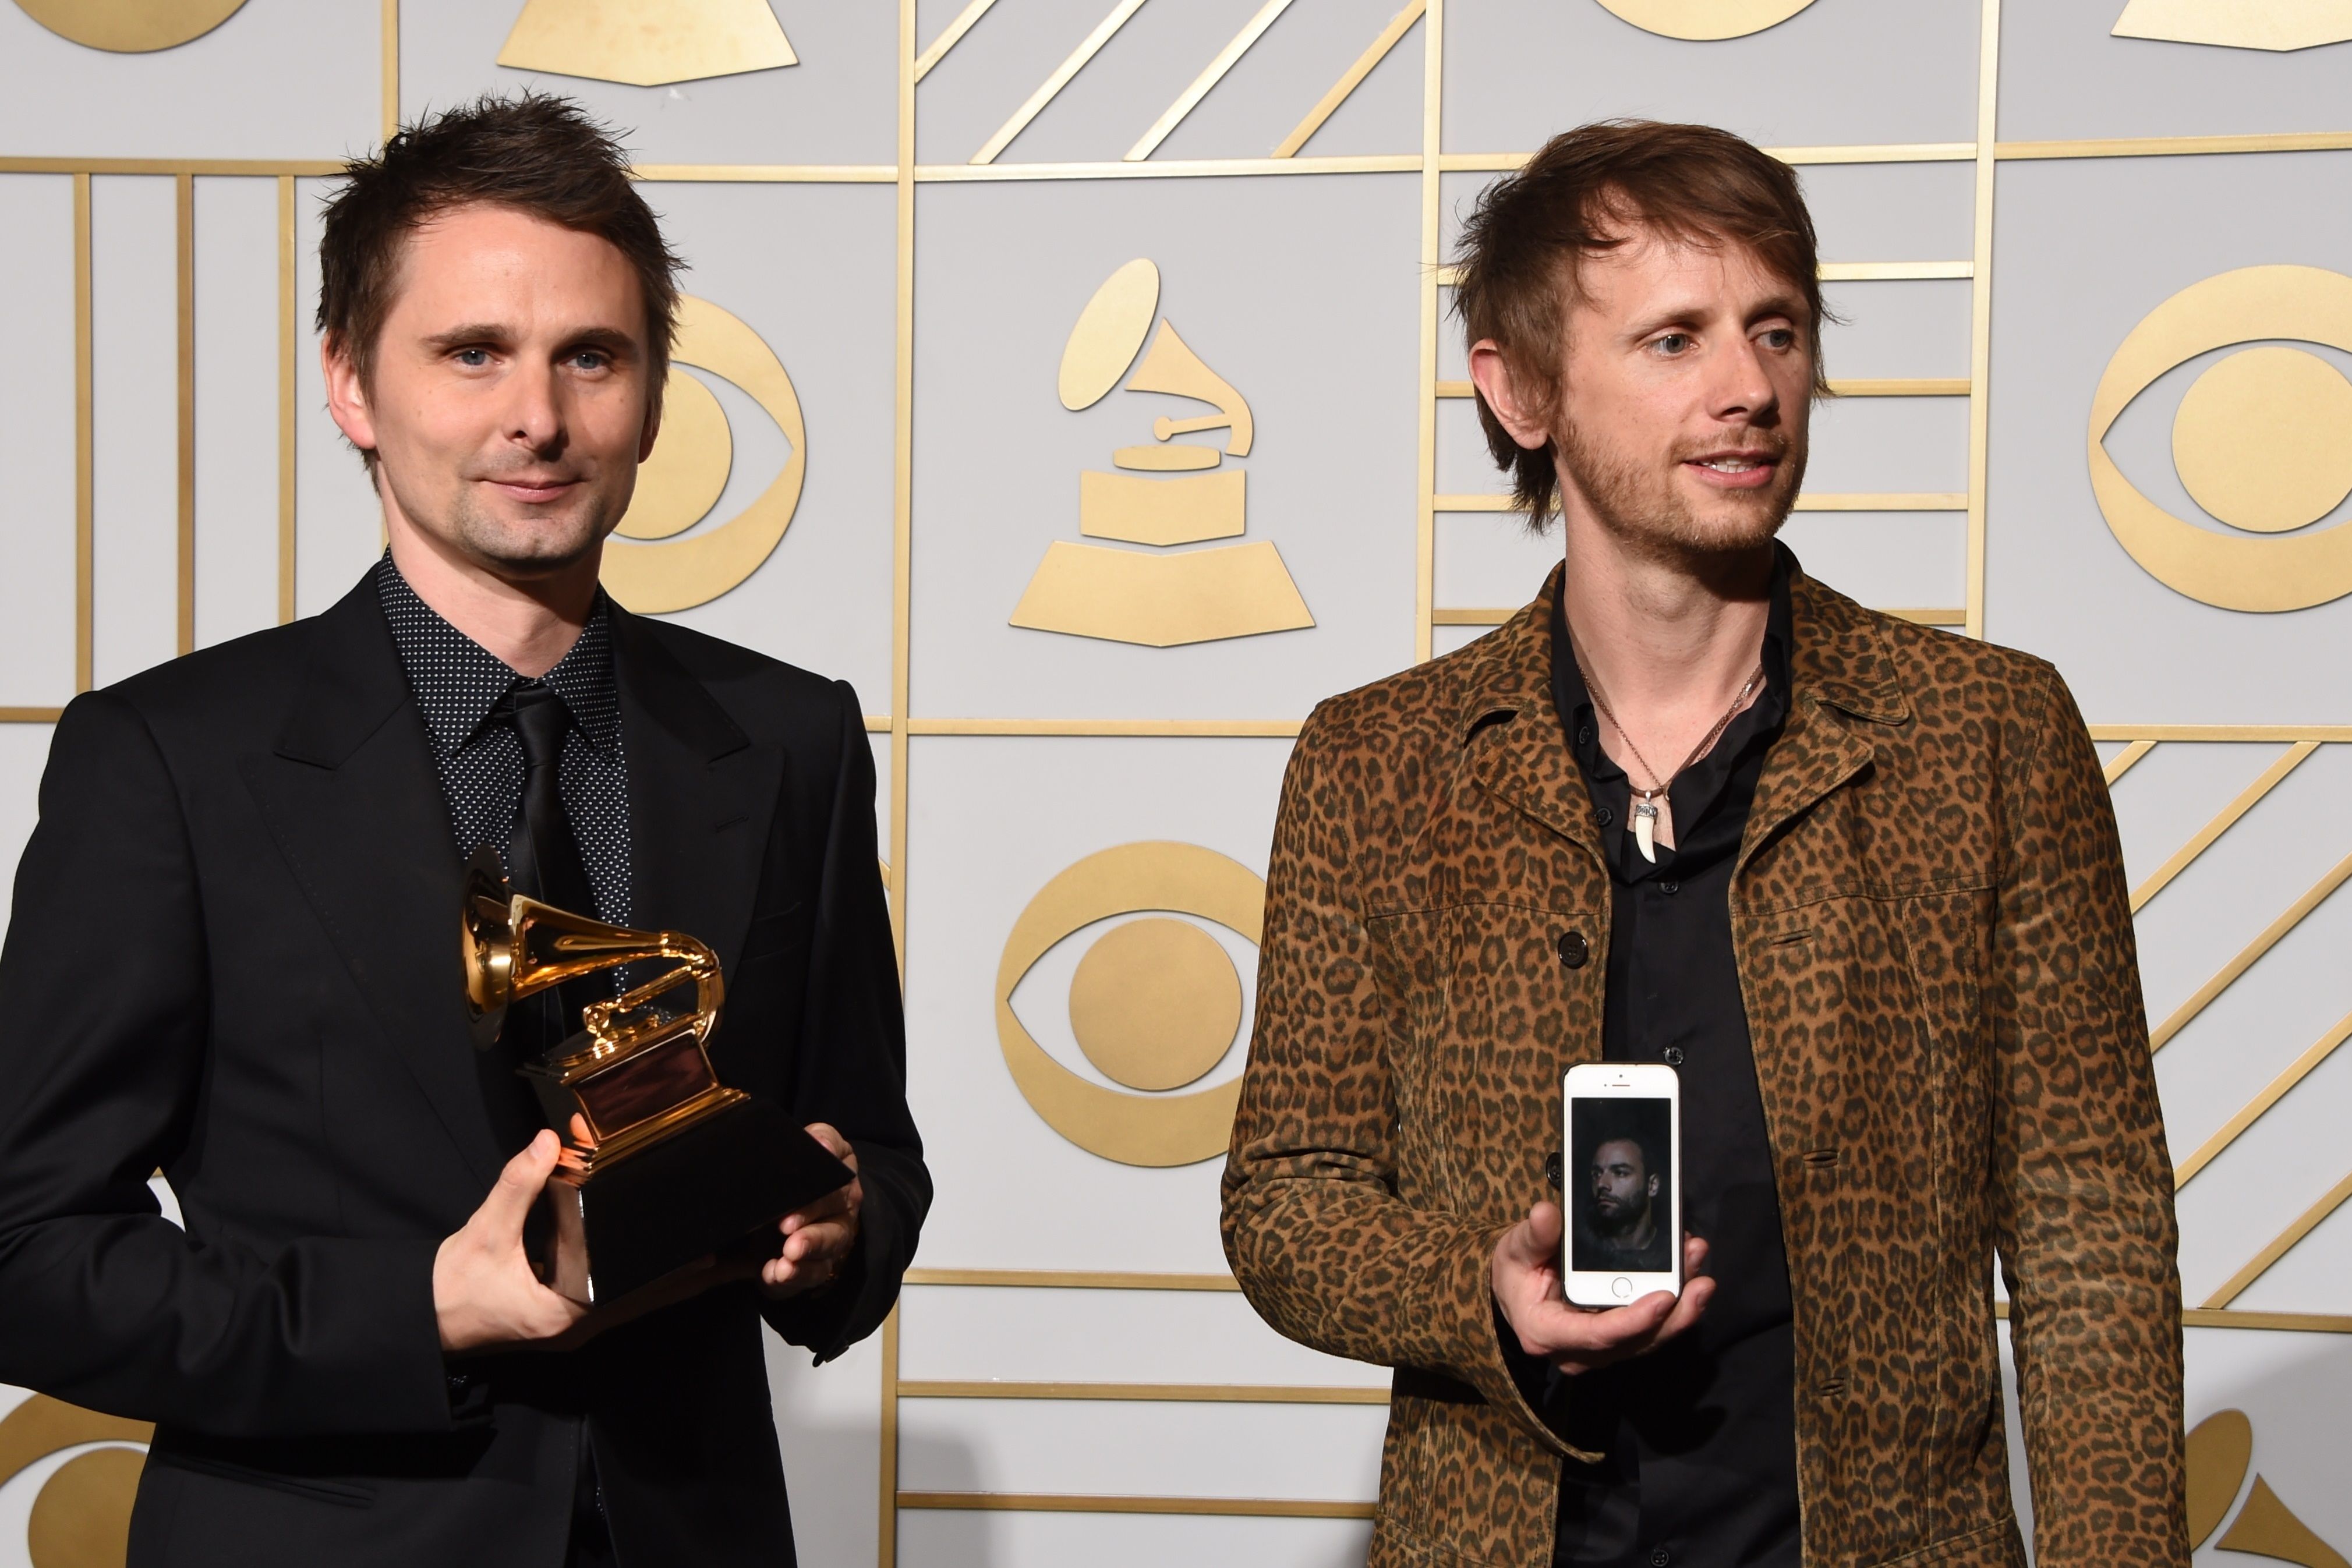 Muse pose in the press room with their Best Rock Album trophy for "Drone" during the 58th Annual Grammy Music Awards in Los Angeles on February 15, 2016. AFP PHOTO / Mark RALSTON / AFP / MARK RALSTON